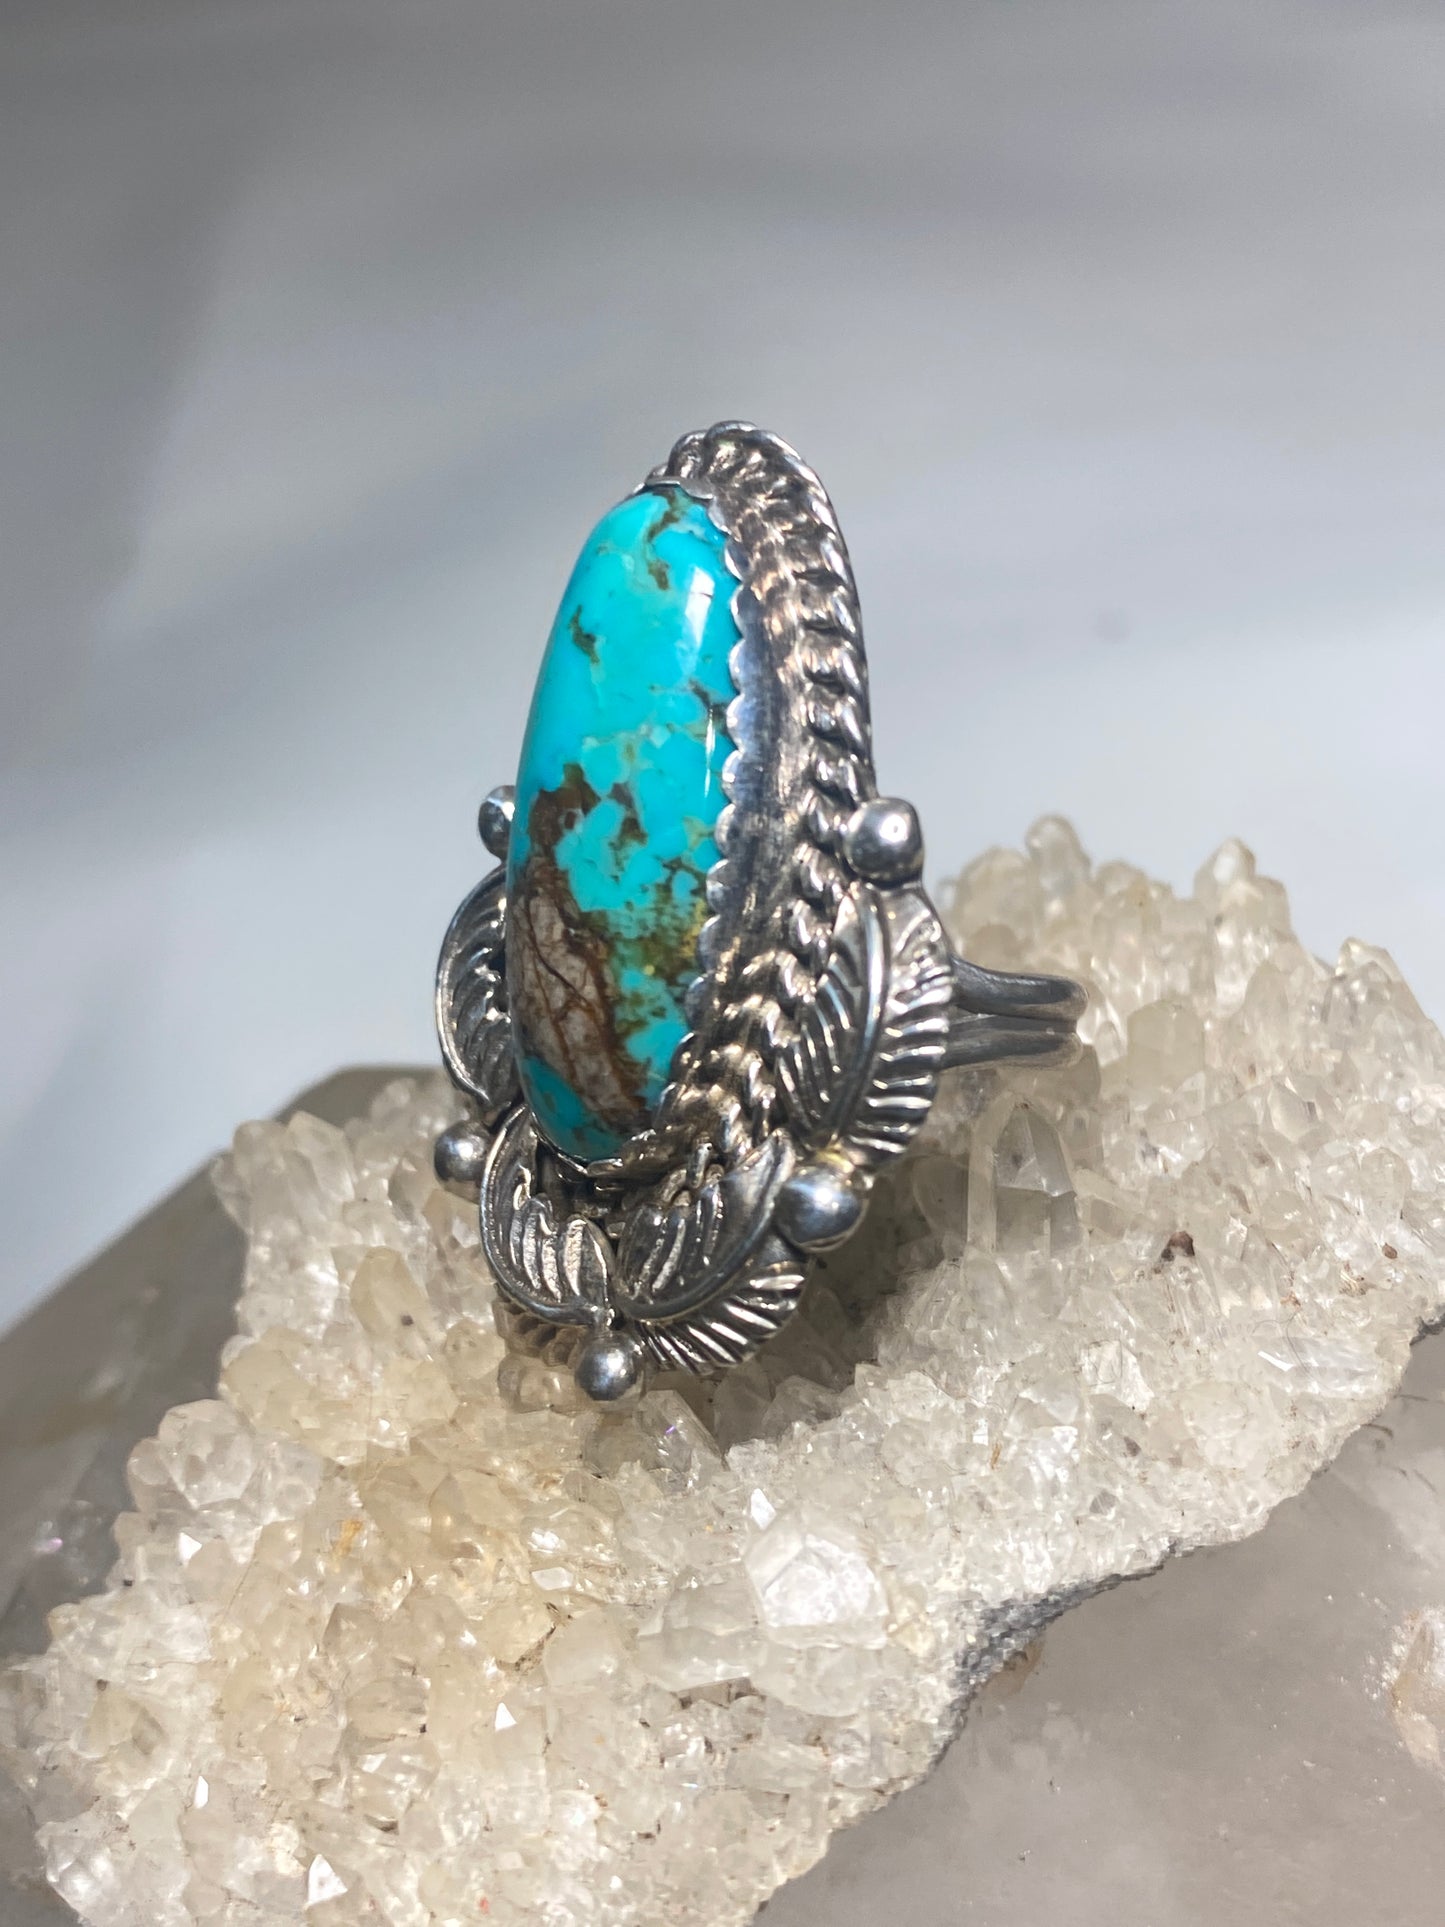 Turquoise ring long Navajo feathers  band sterling silver women girls